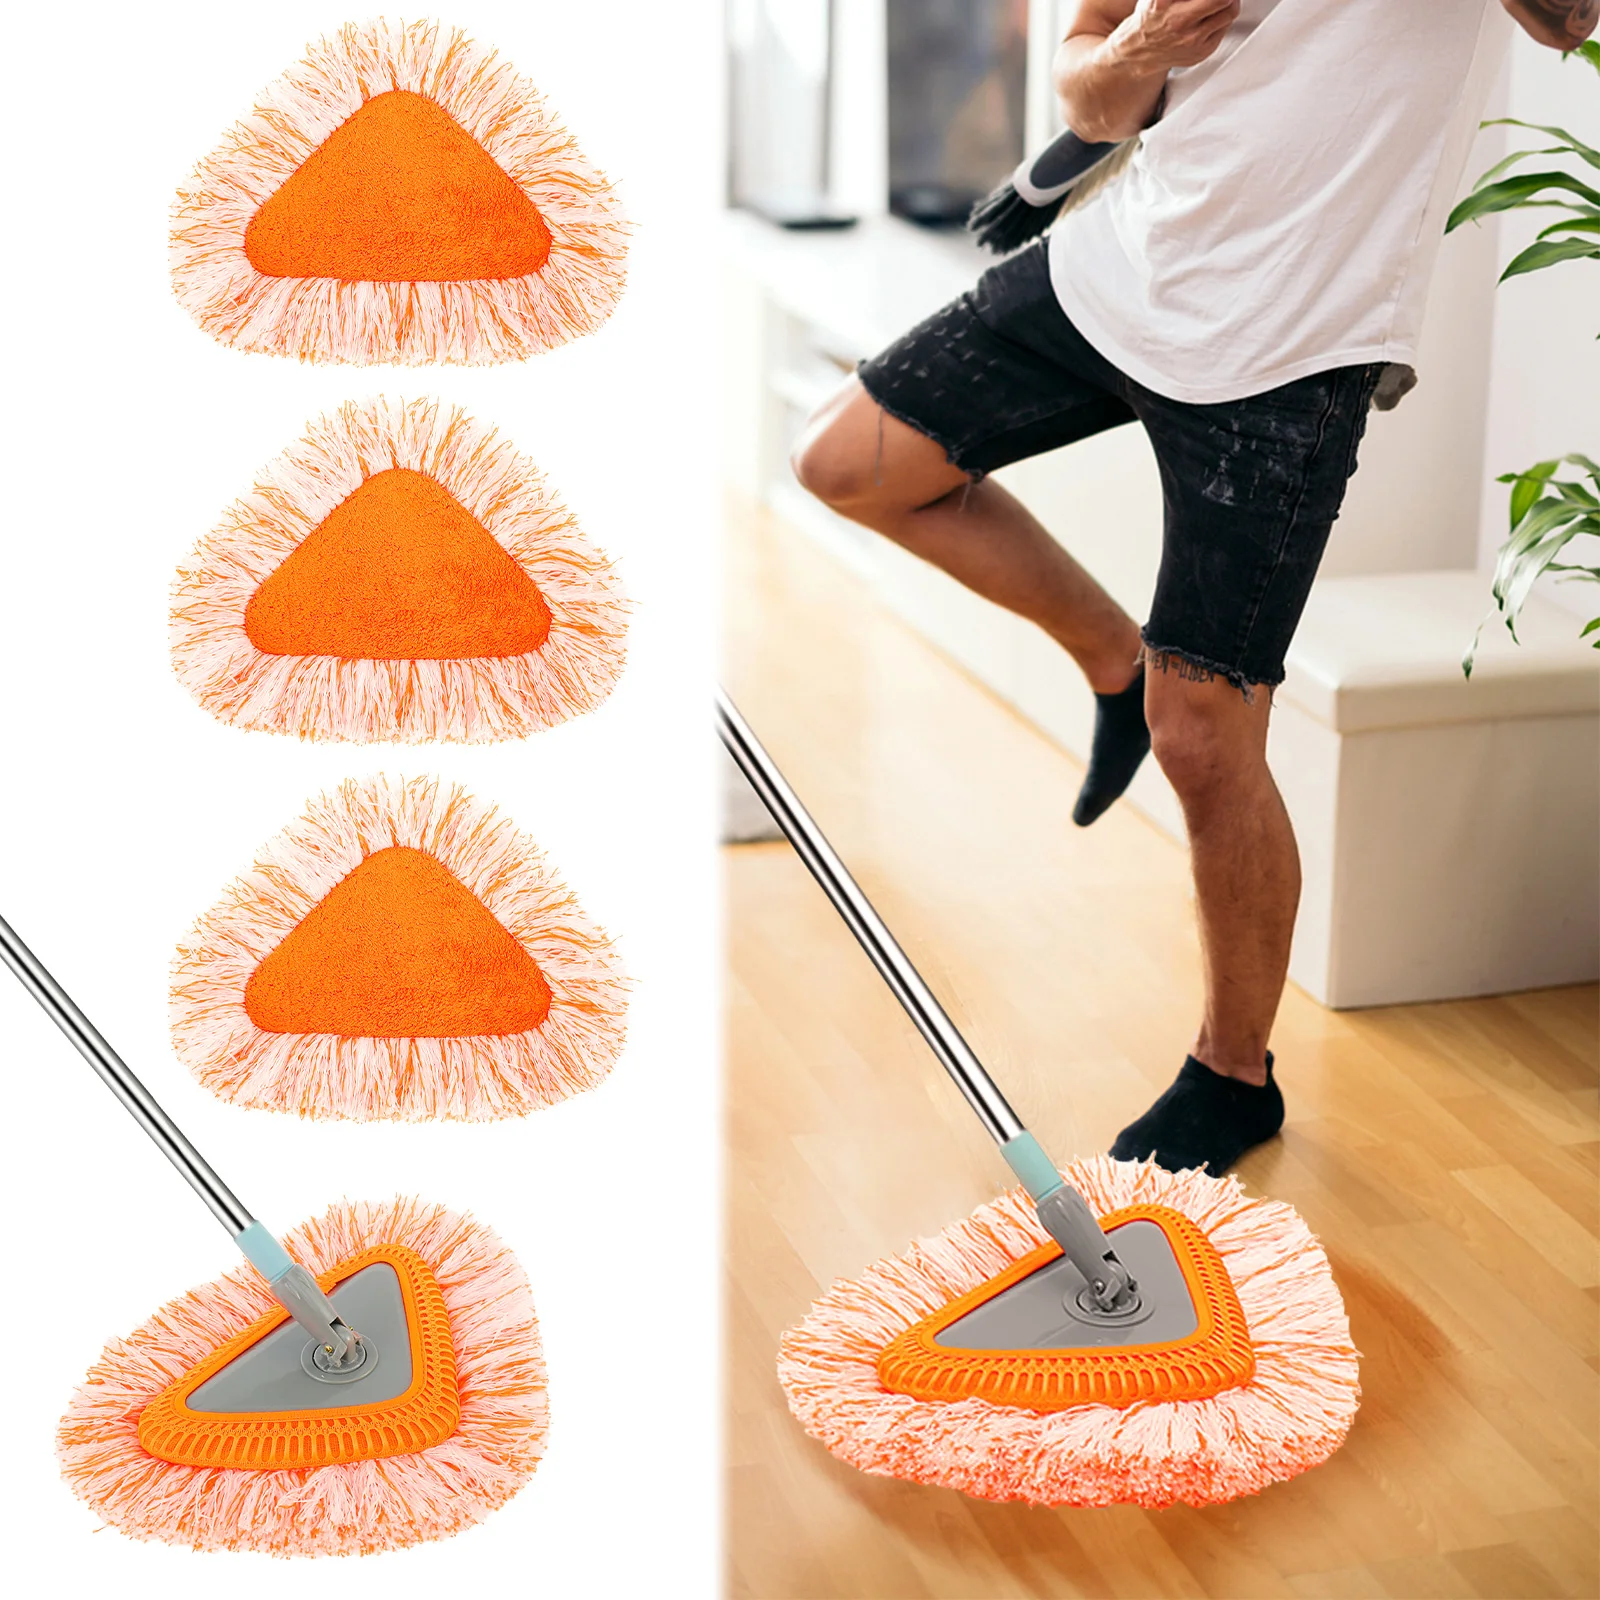 

Triangle Floor Mops Set 360° Rotatable Microfiber Wall Mops with 3 Replaceable Mop Pads Reusable Washable Cleaning Mops Set Wet